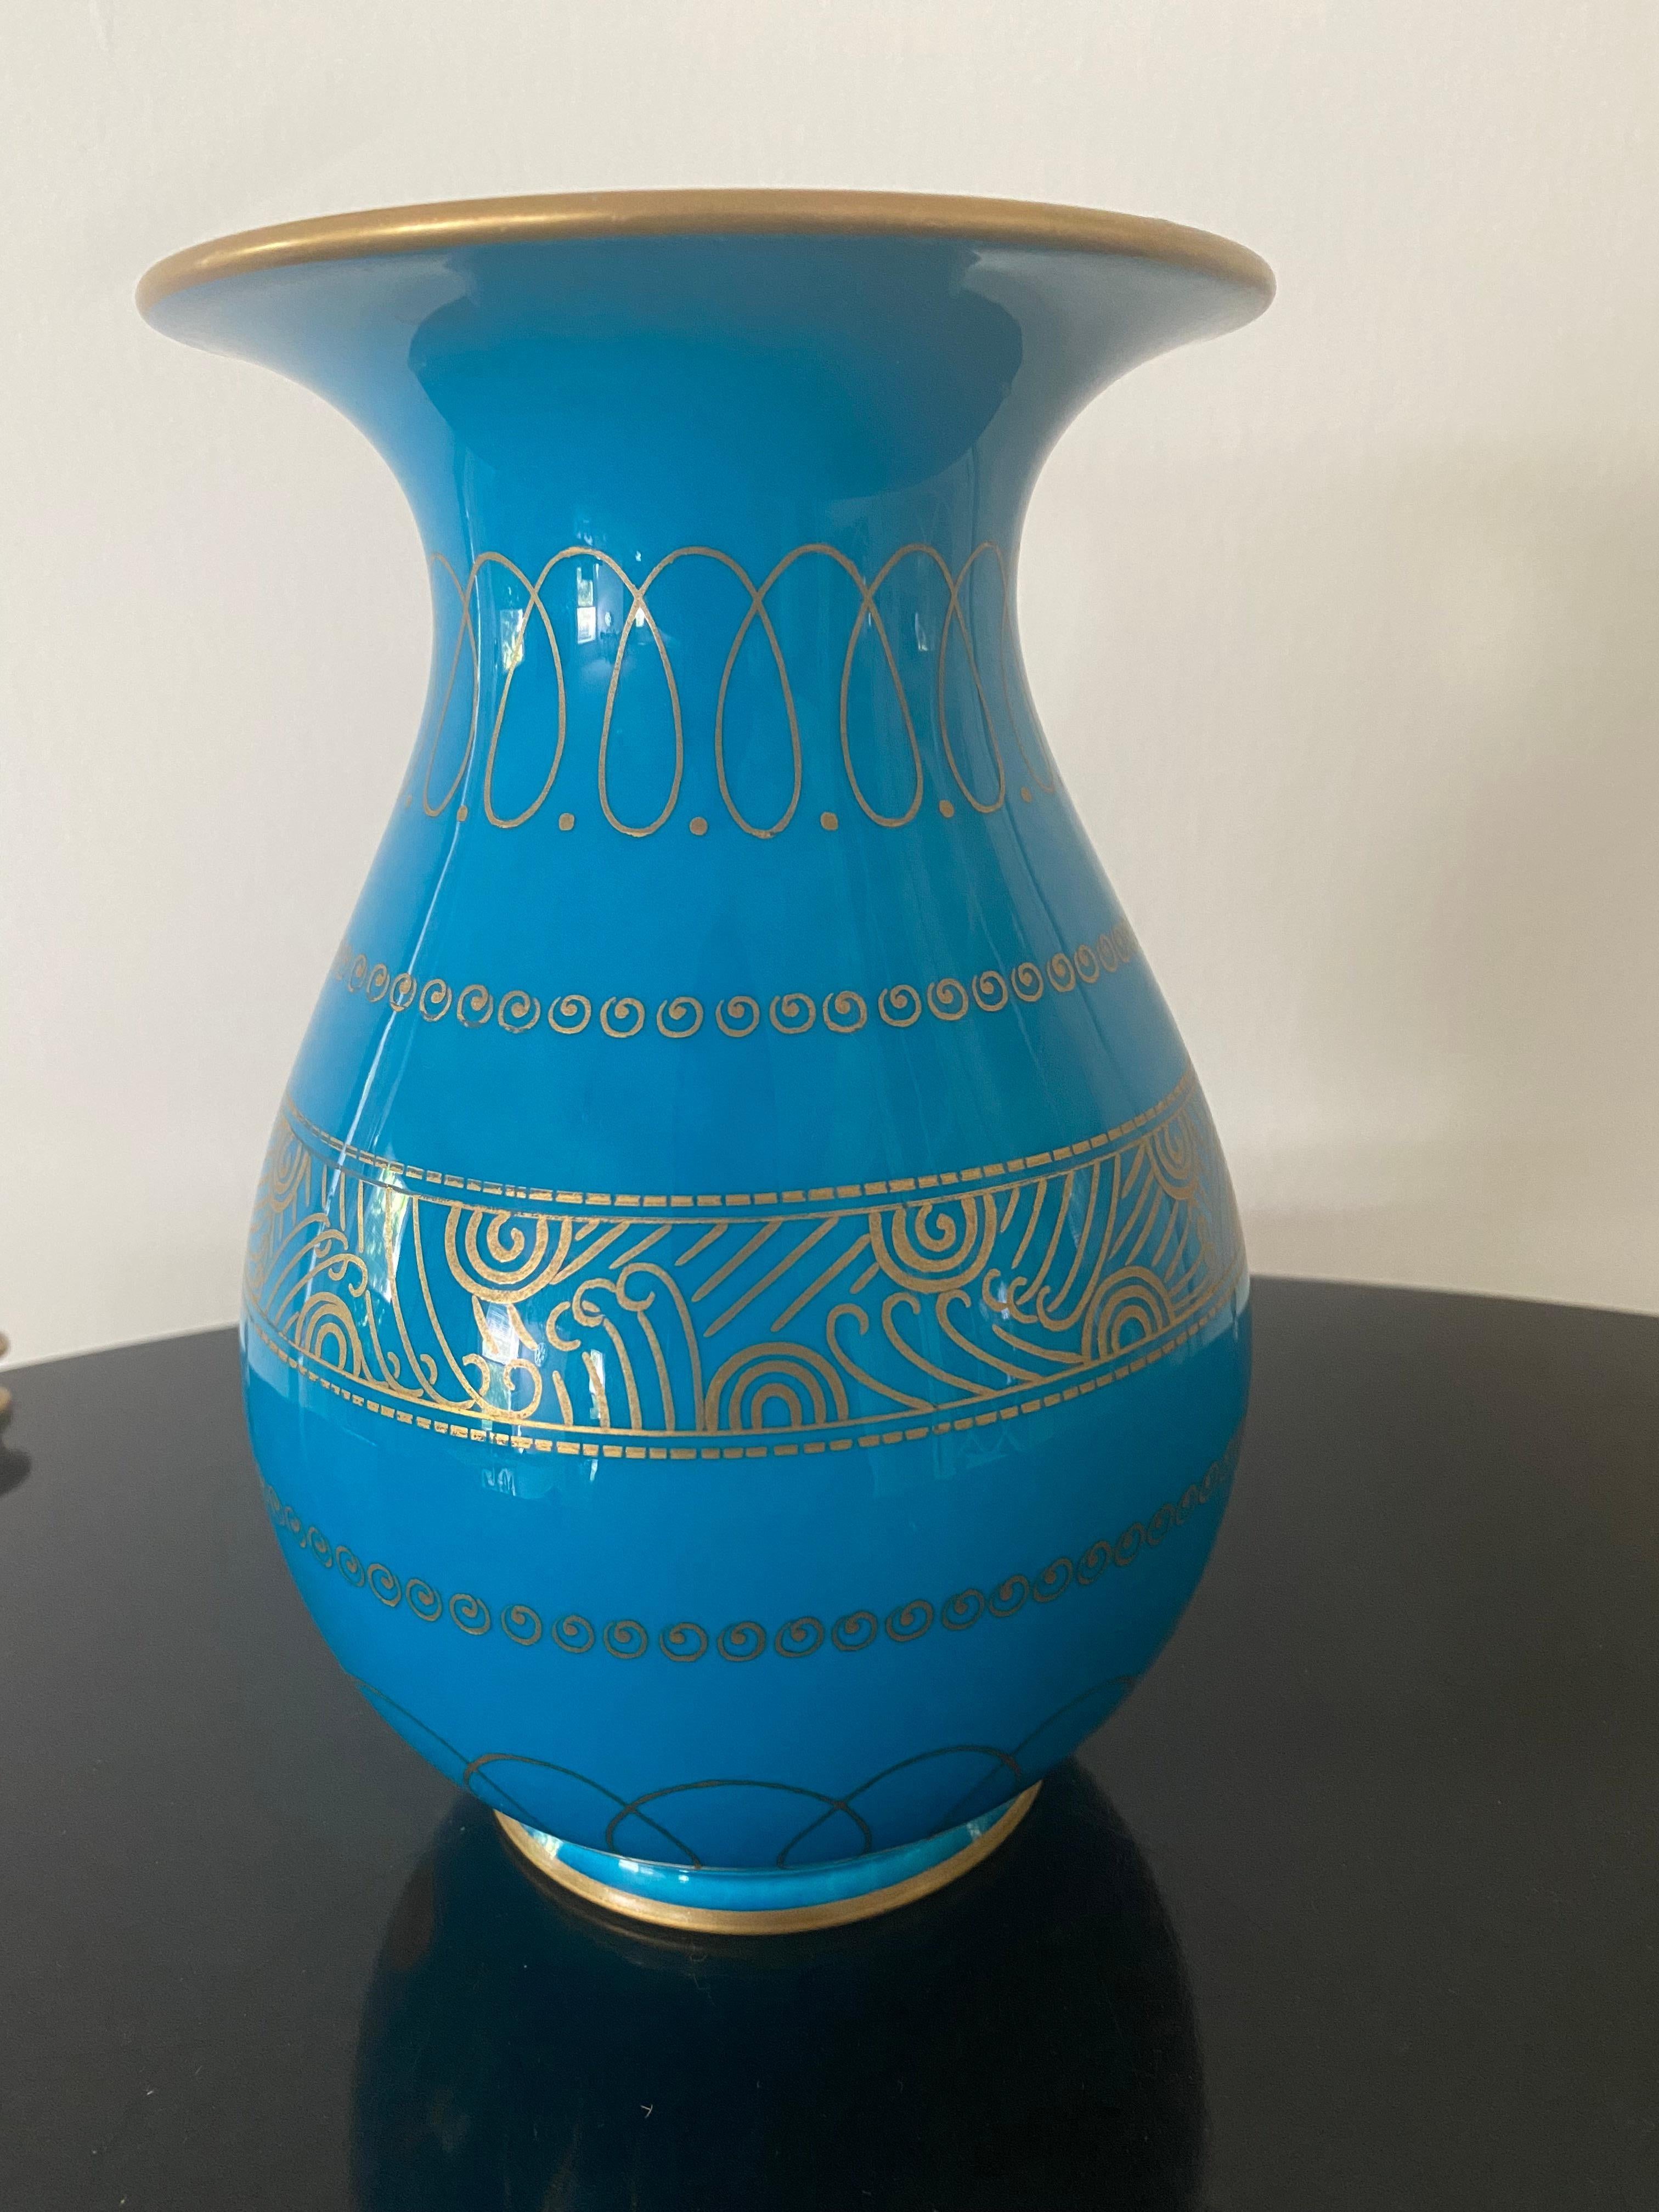 Fantastic Art Deco vase in gilt decor over rich turquoise ground.
Form designed by Emile Decoeur (1876-1953)
Decoration possibly designed by Suzanne Lalique-Haviland or Emile-Jacques Ruhlmann.

Remnant of exhibition label (50) and department store